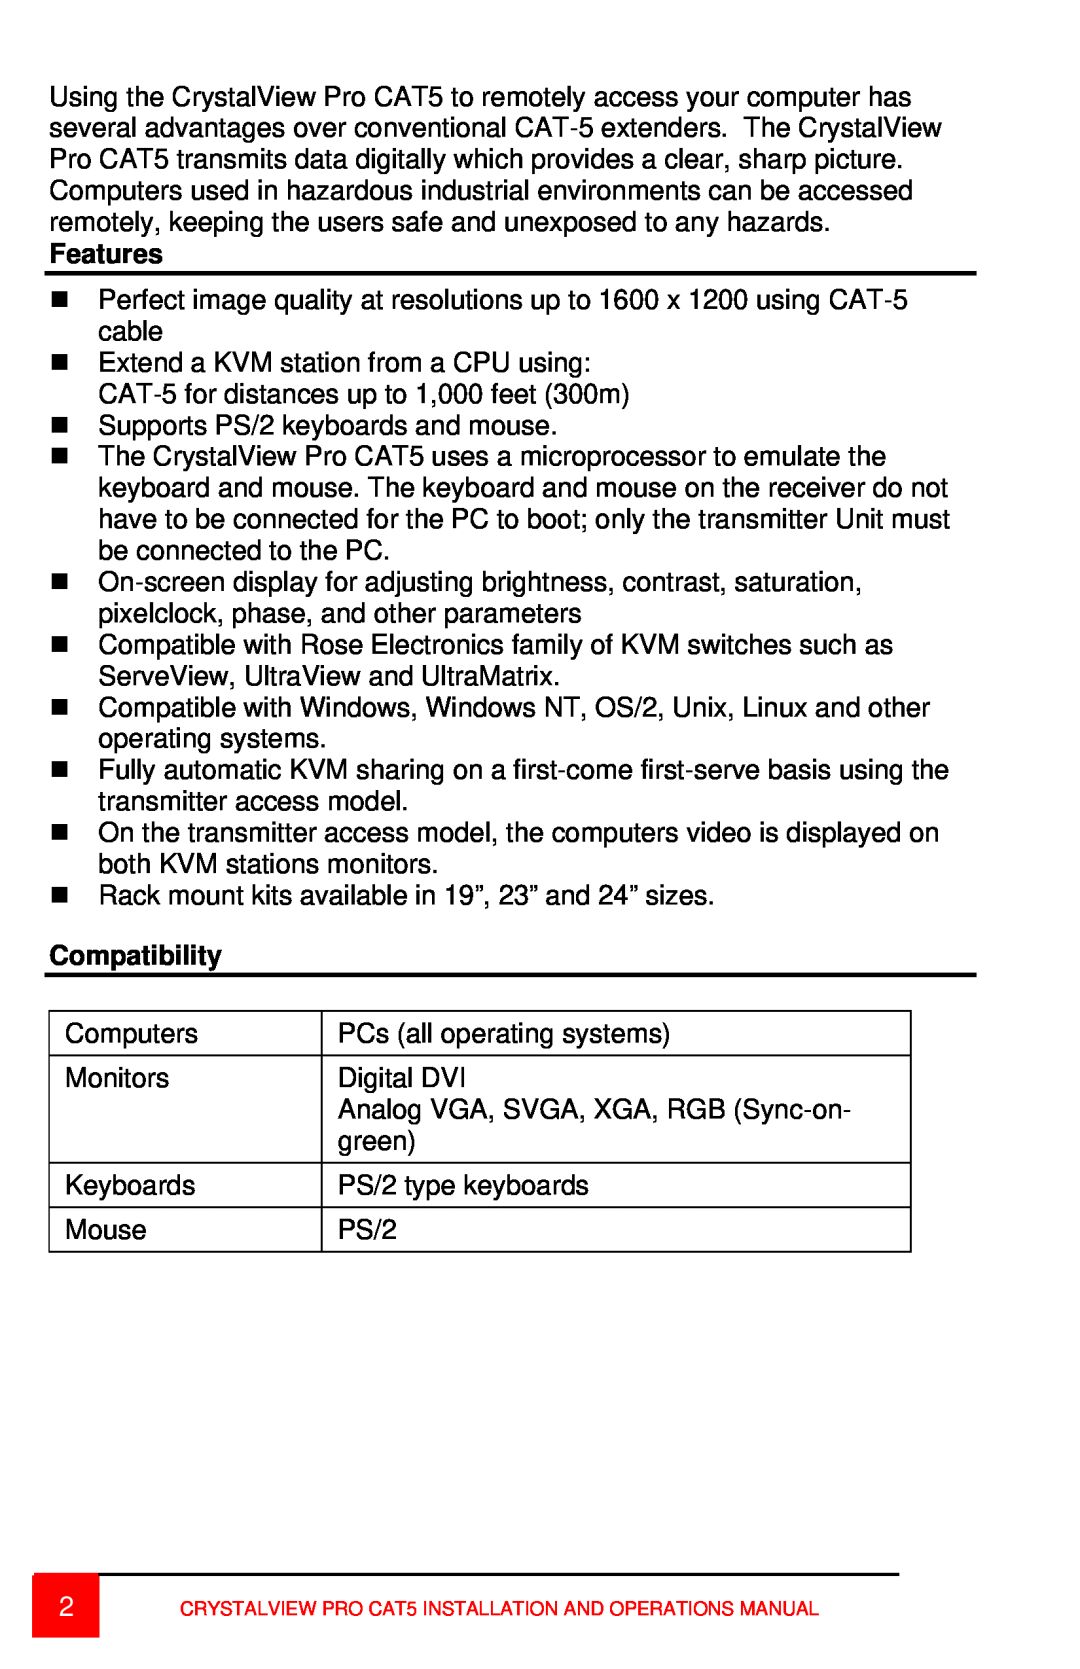 Rose electronic CAT5 manual Features, Compatibility 